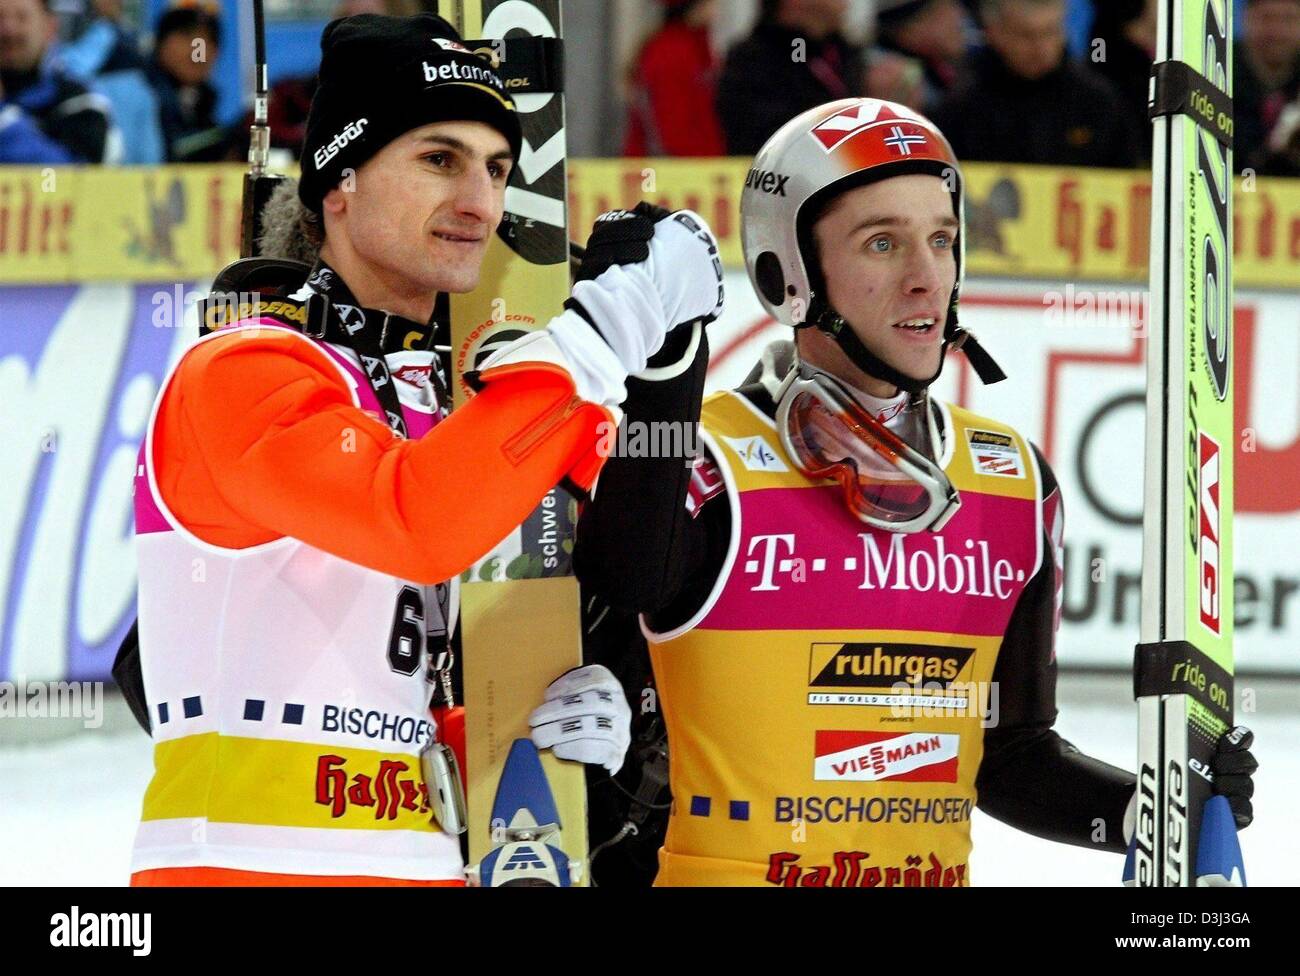 (dpa) - Austrian ski jumper Martin Hoellwarth (L) is the first to congratulate Norwegian ski jumper Sigurd Pettersen (R) to his overall title after the last stage of the Four Hills tournament in Bischofshofen, Austria, 6 January 2004. Pettersen won the tournament with his third victory of the event, giving Norway their first overall title in a decade. In the overall standings, Pett Stock Photo